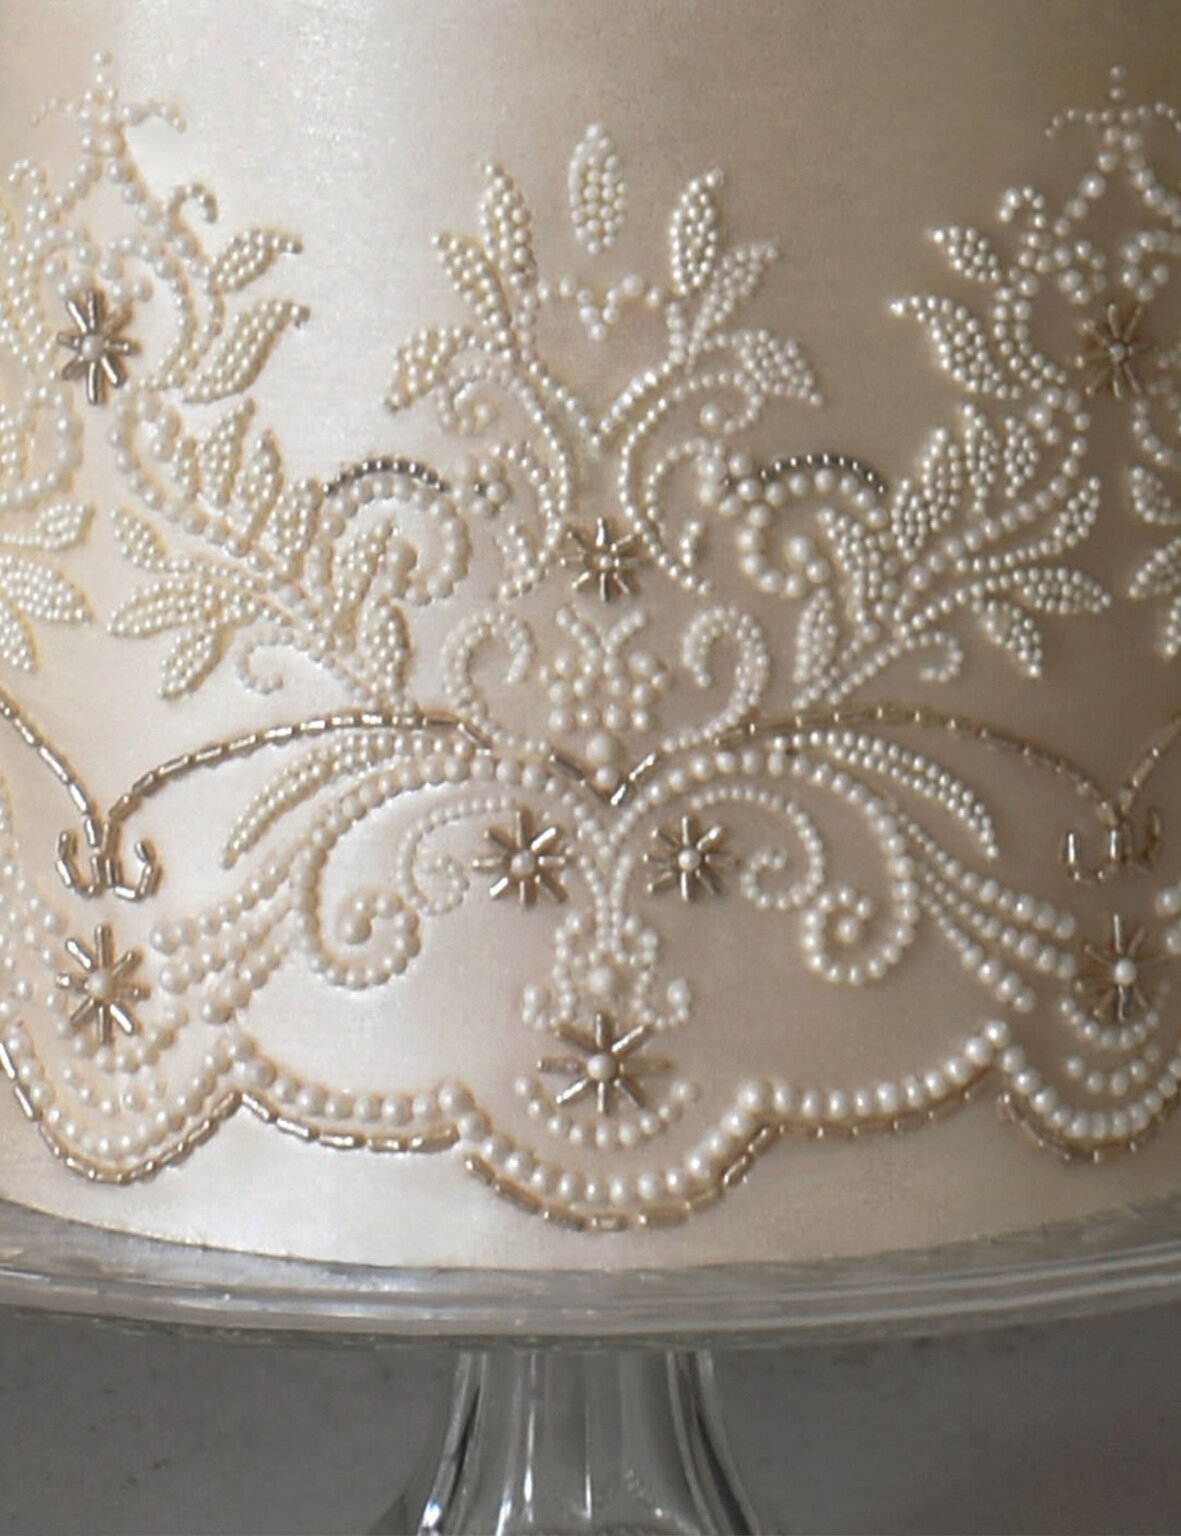 Intricate beaded lace detail and hand placed pearls on a satin sheen wedding cake